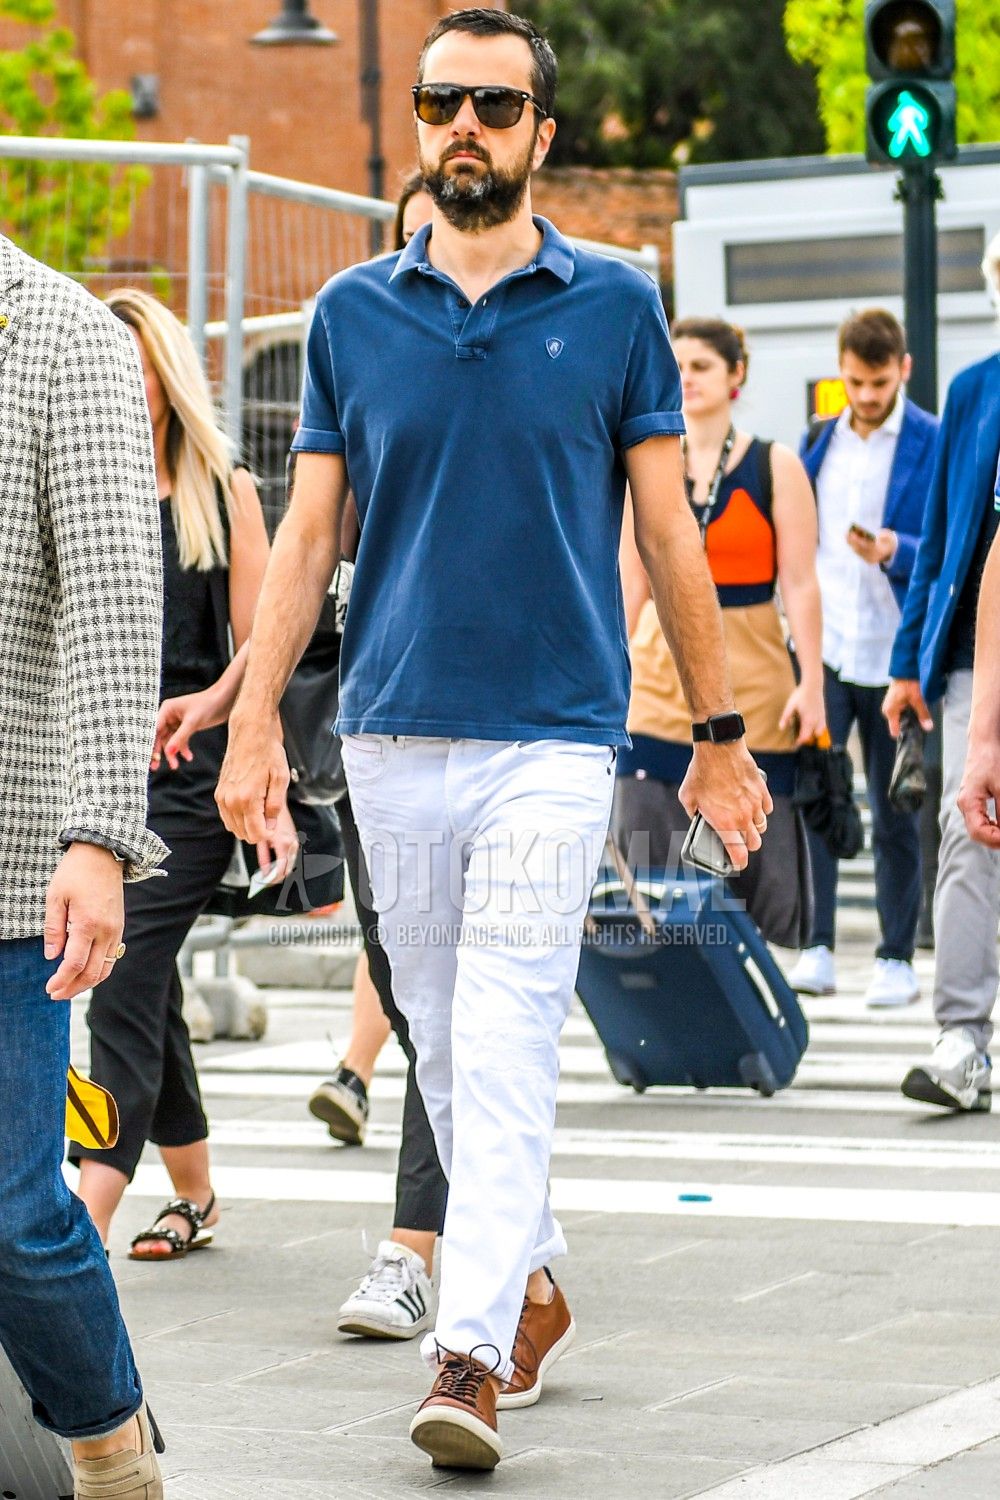 Navy Jeans with Blue Polo Outfits For Men (53 ideas & outfits